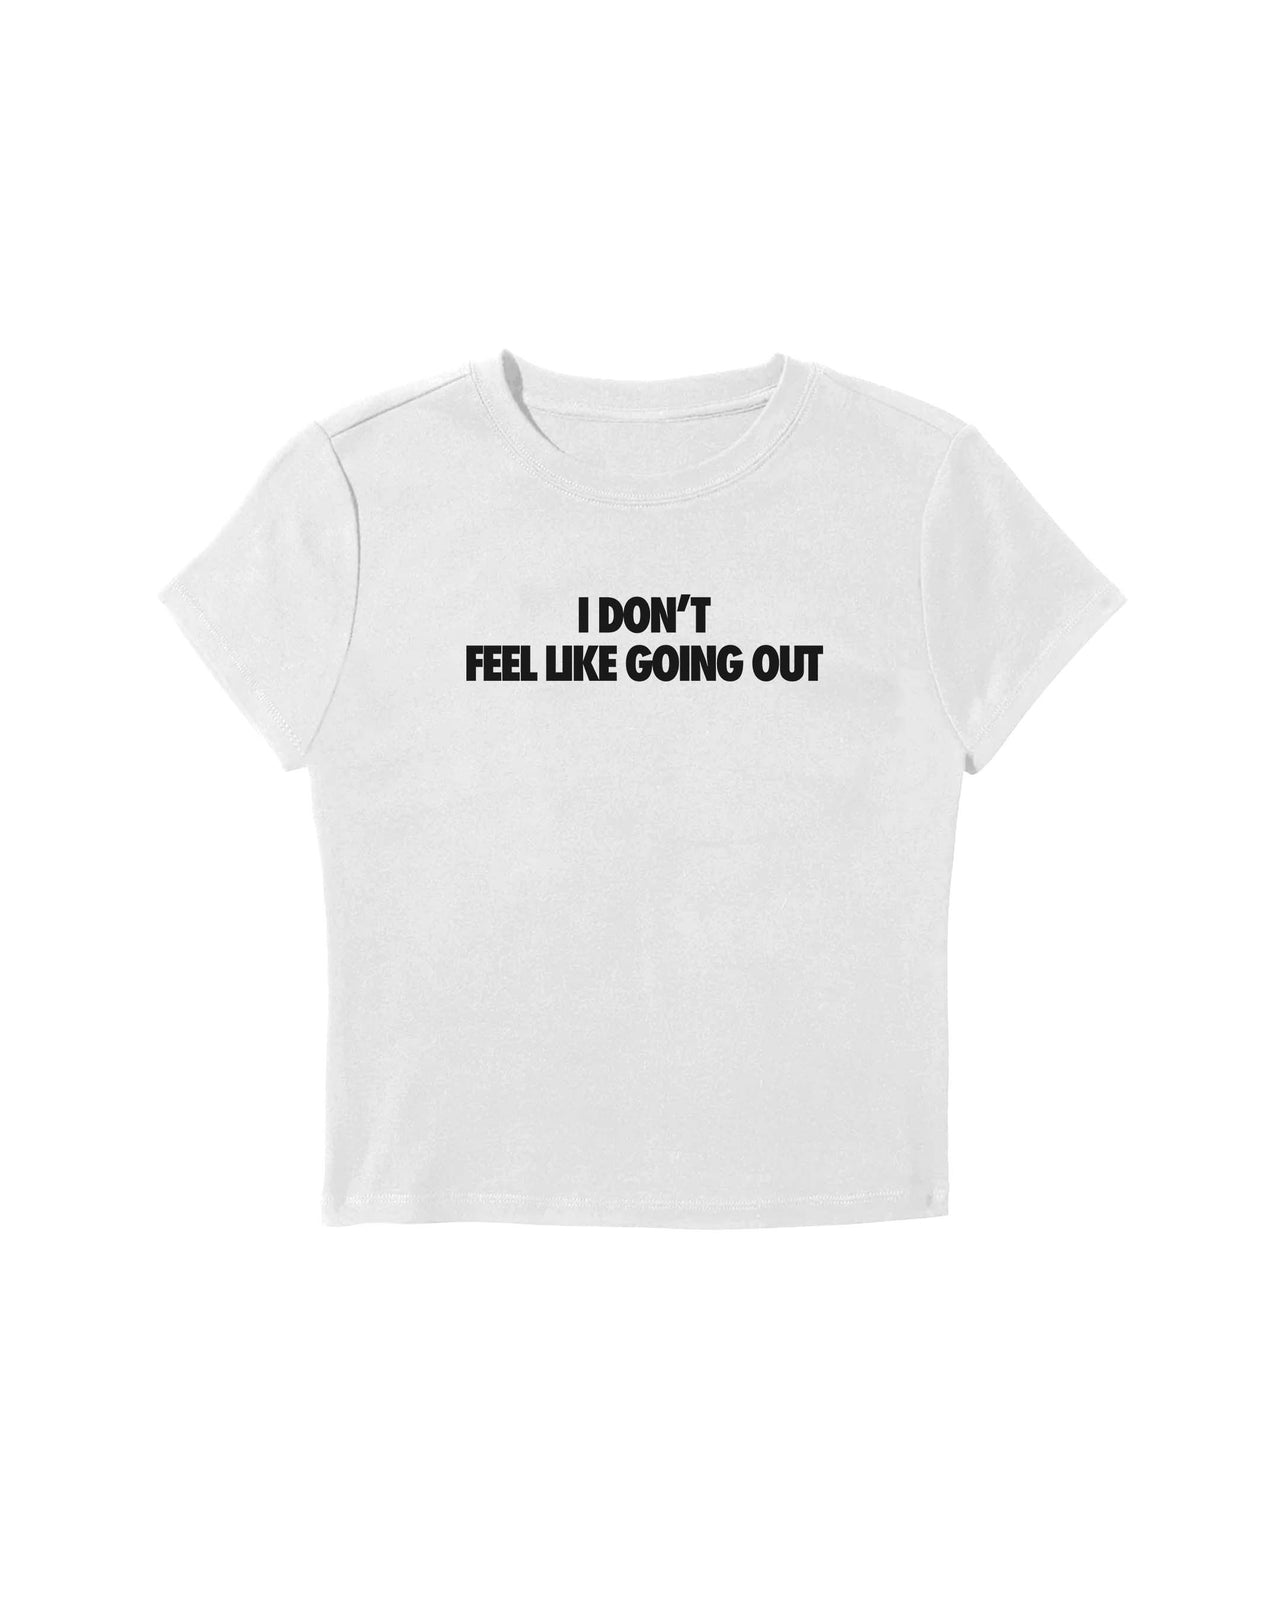 I Don't Feel Like Going Out Baby Tee